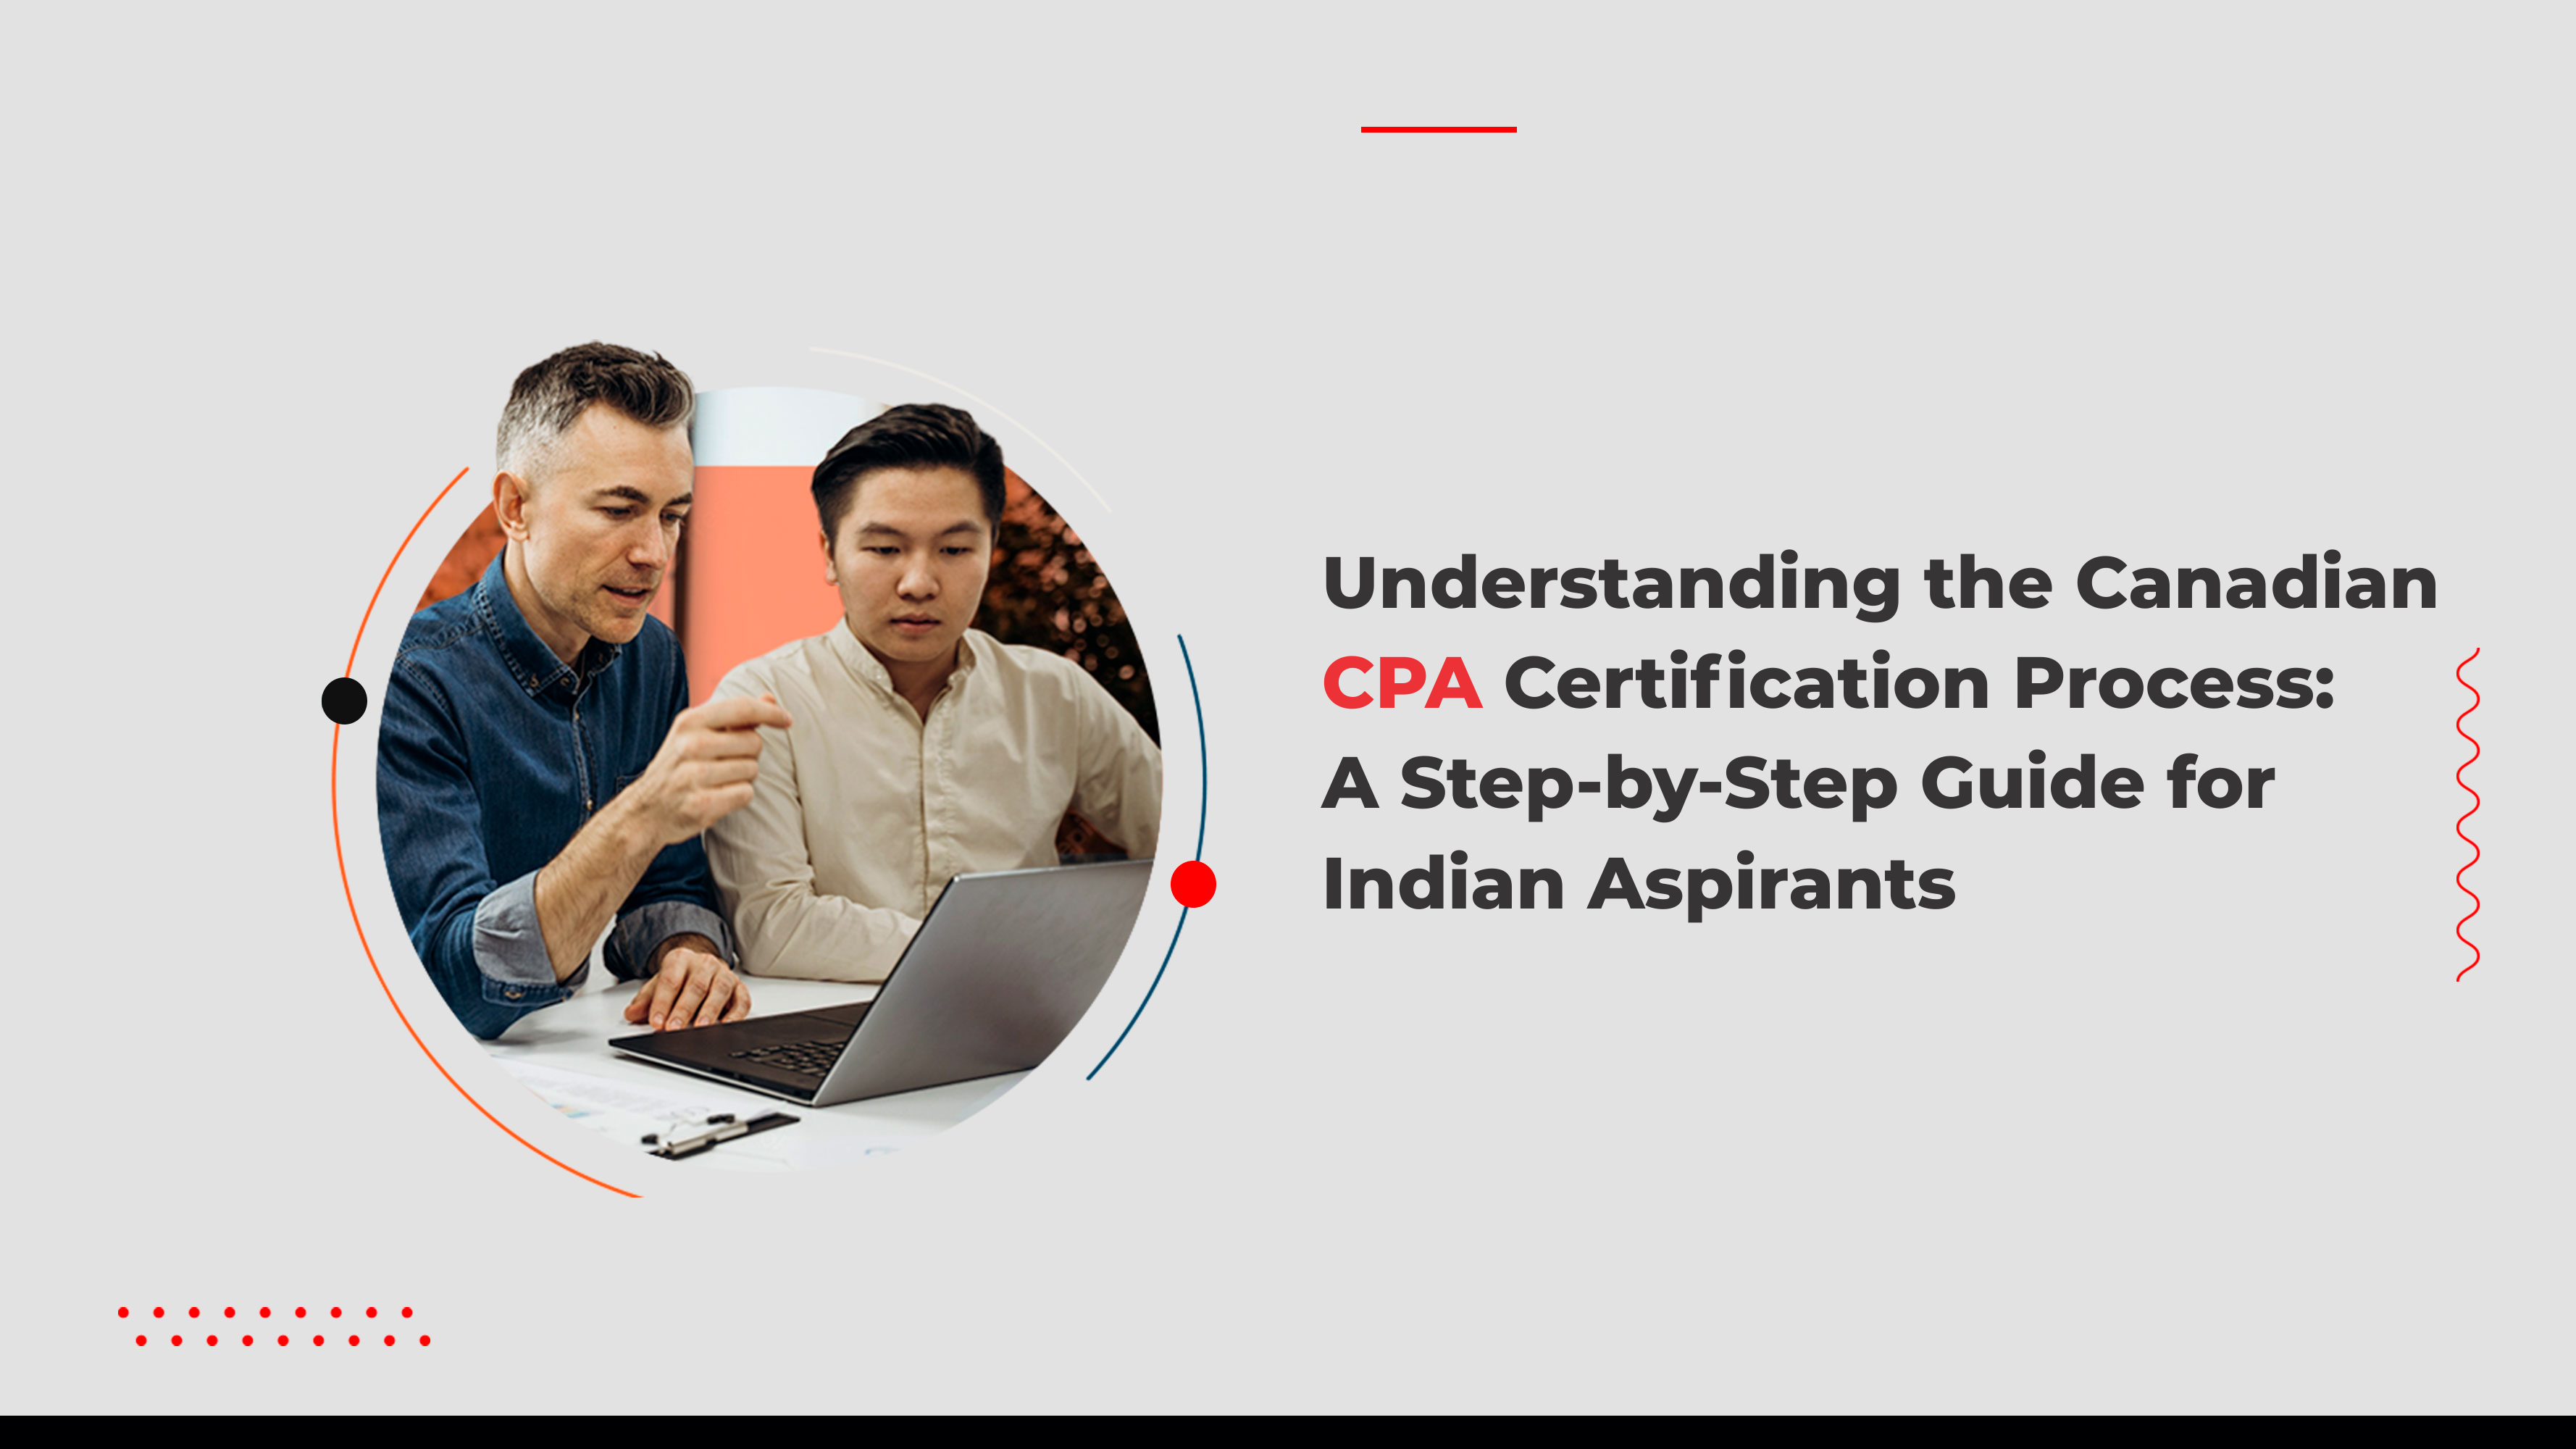 Canadian CPA certification